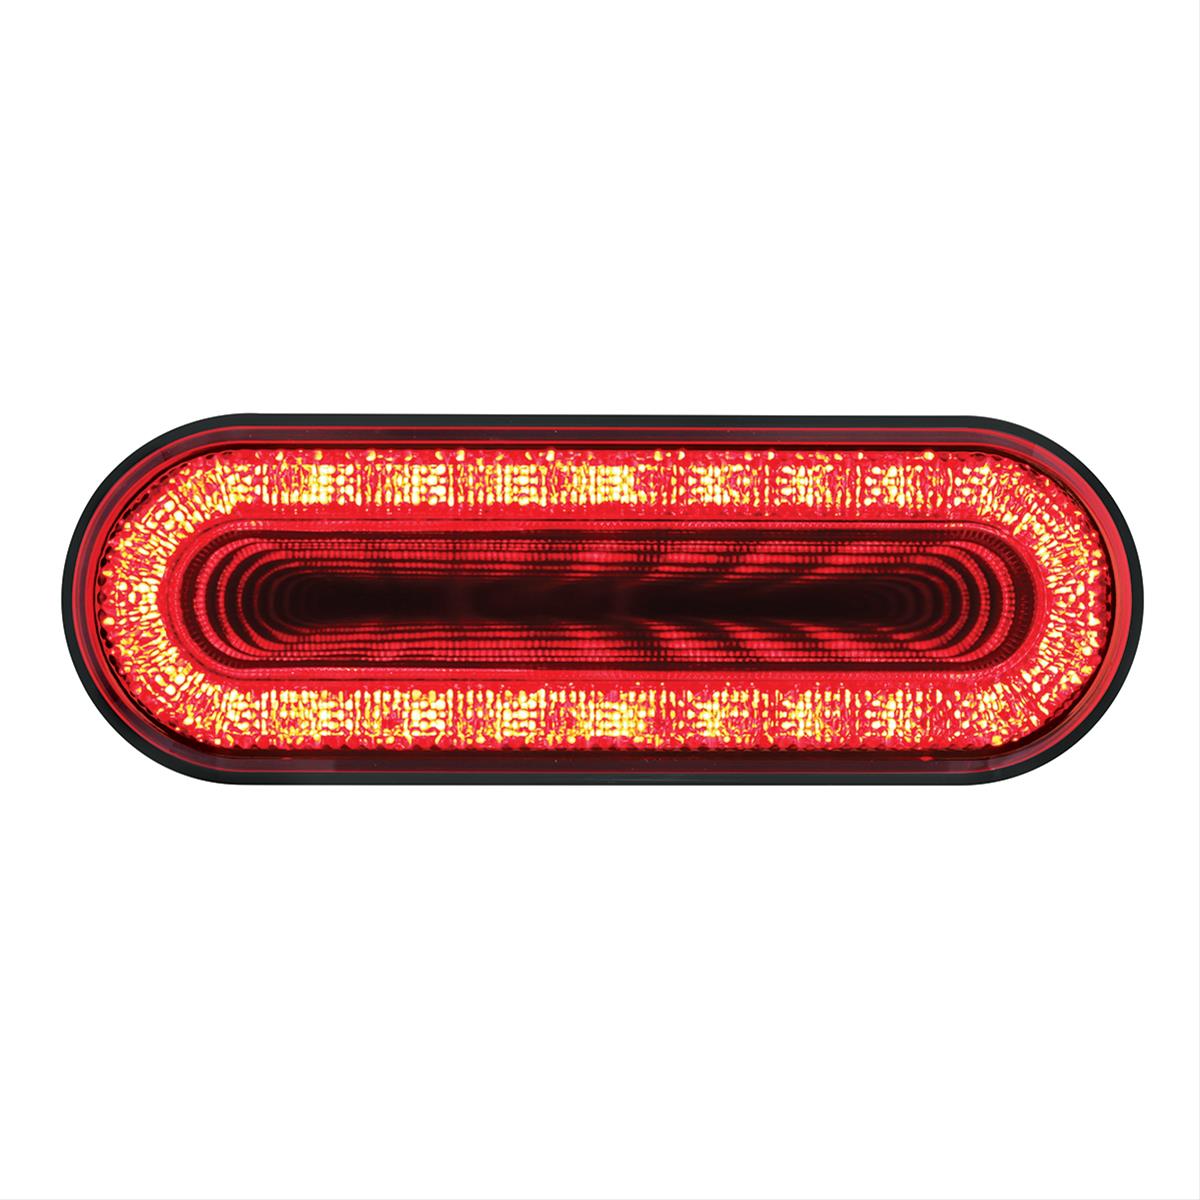 24 LED 6" OVAL MIRAGE LIGHT (STOP, TURN & TAIL)